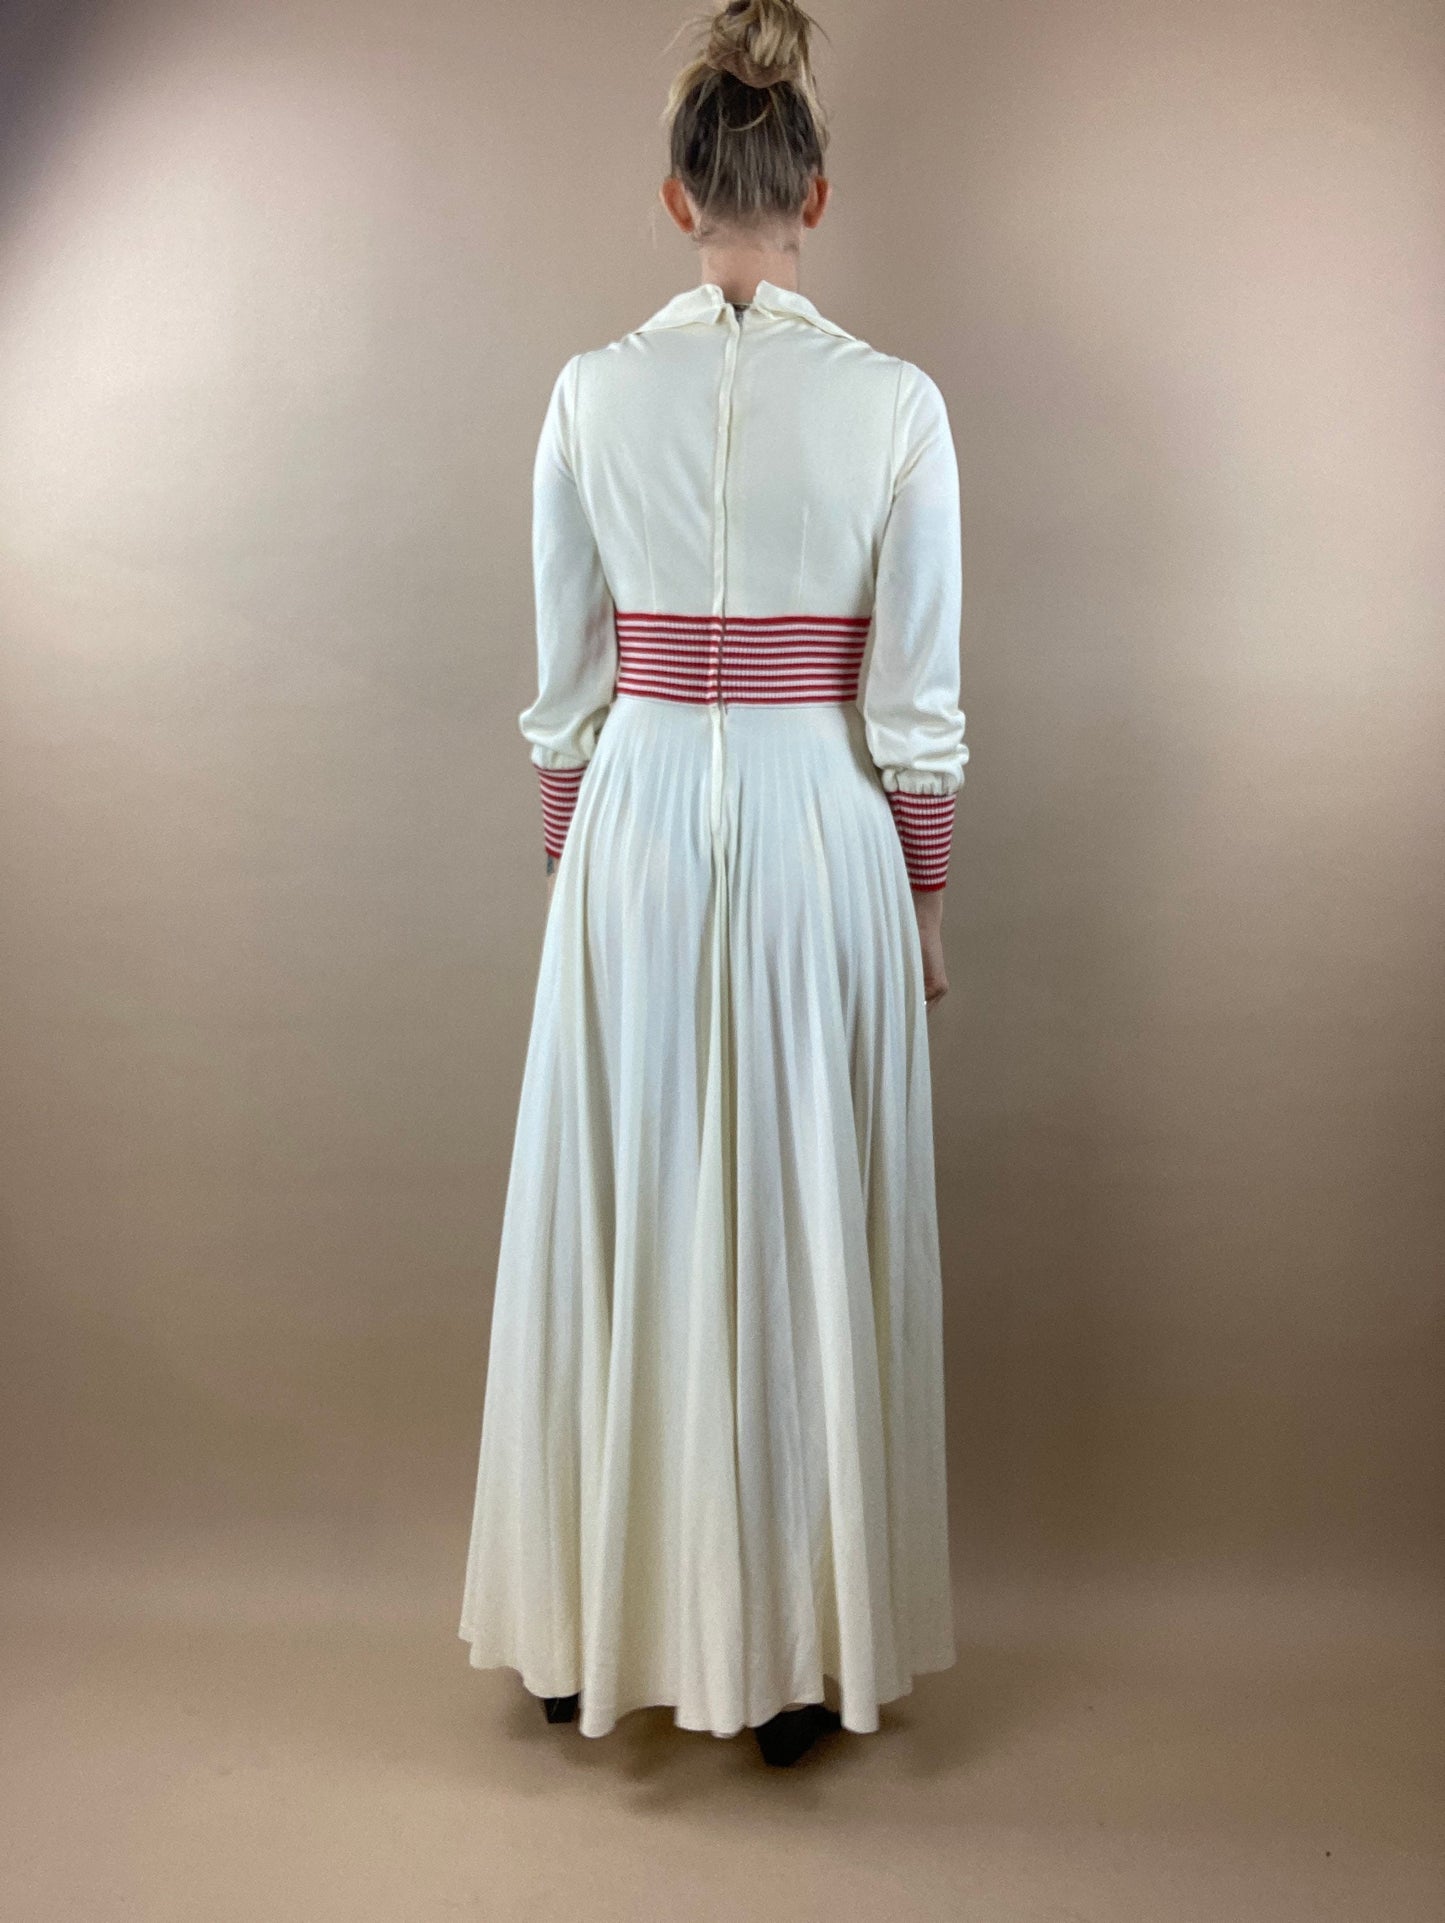 70s White and Red Long V Neck Dress / Vintage Formal Dress / Small